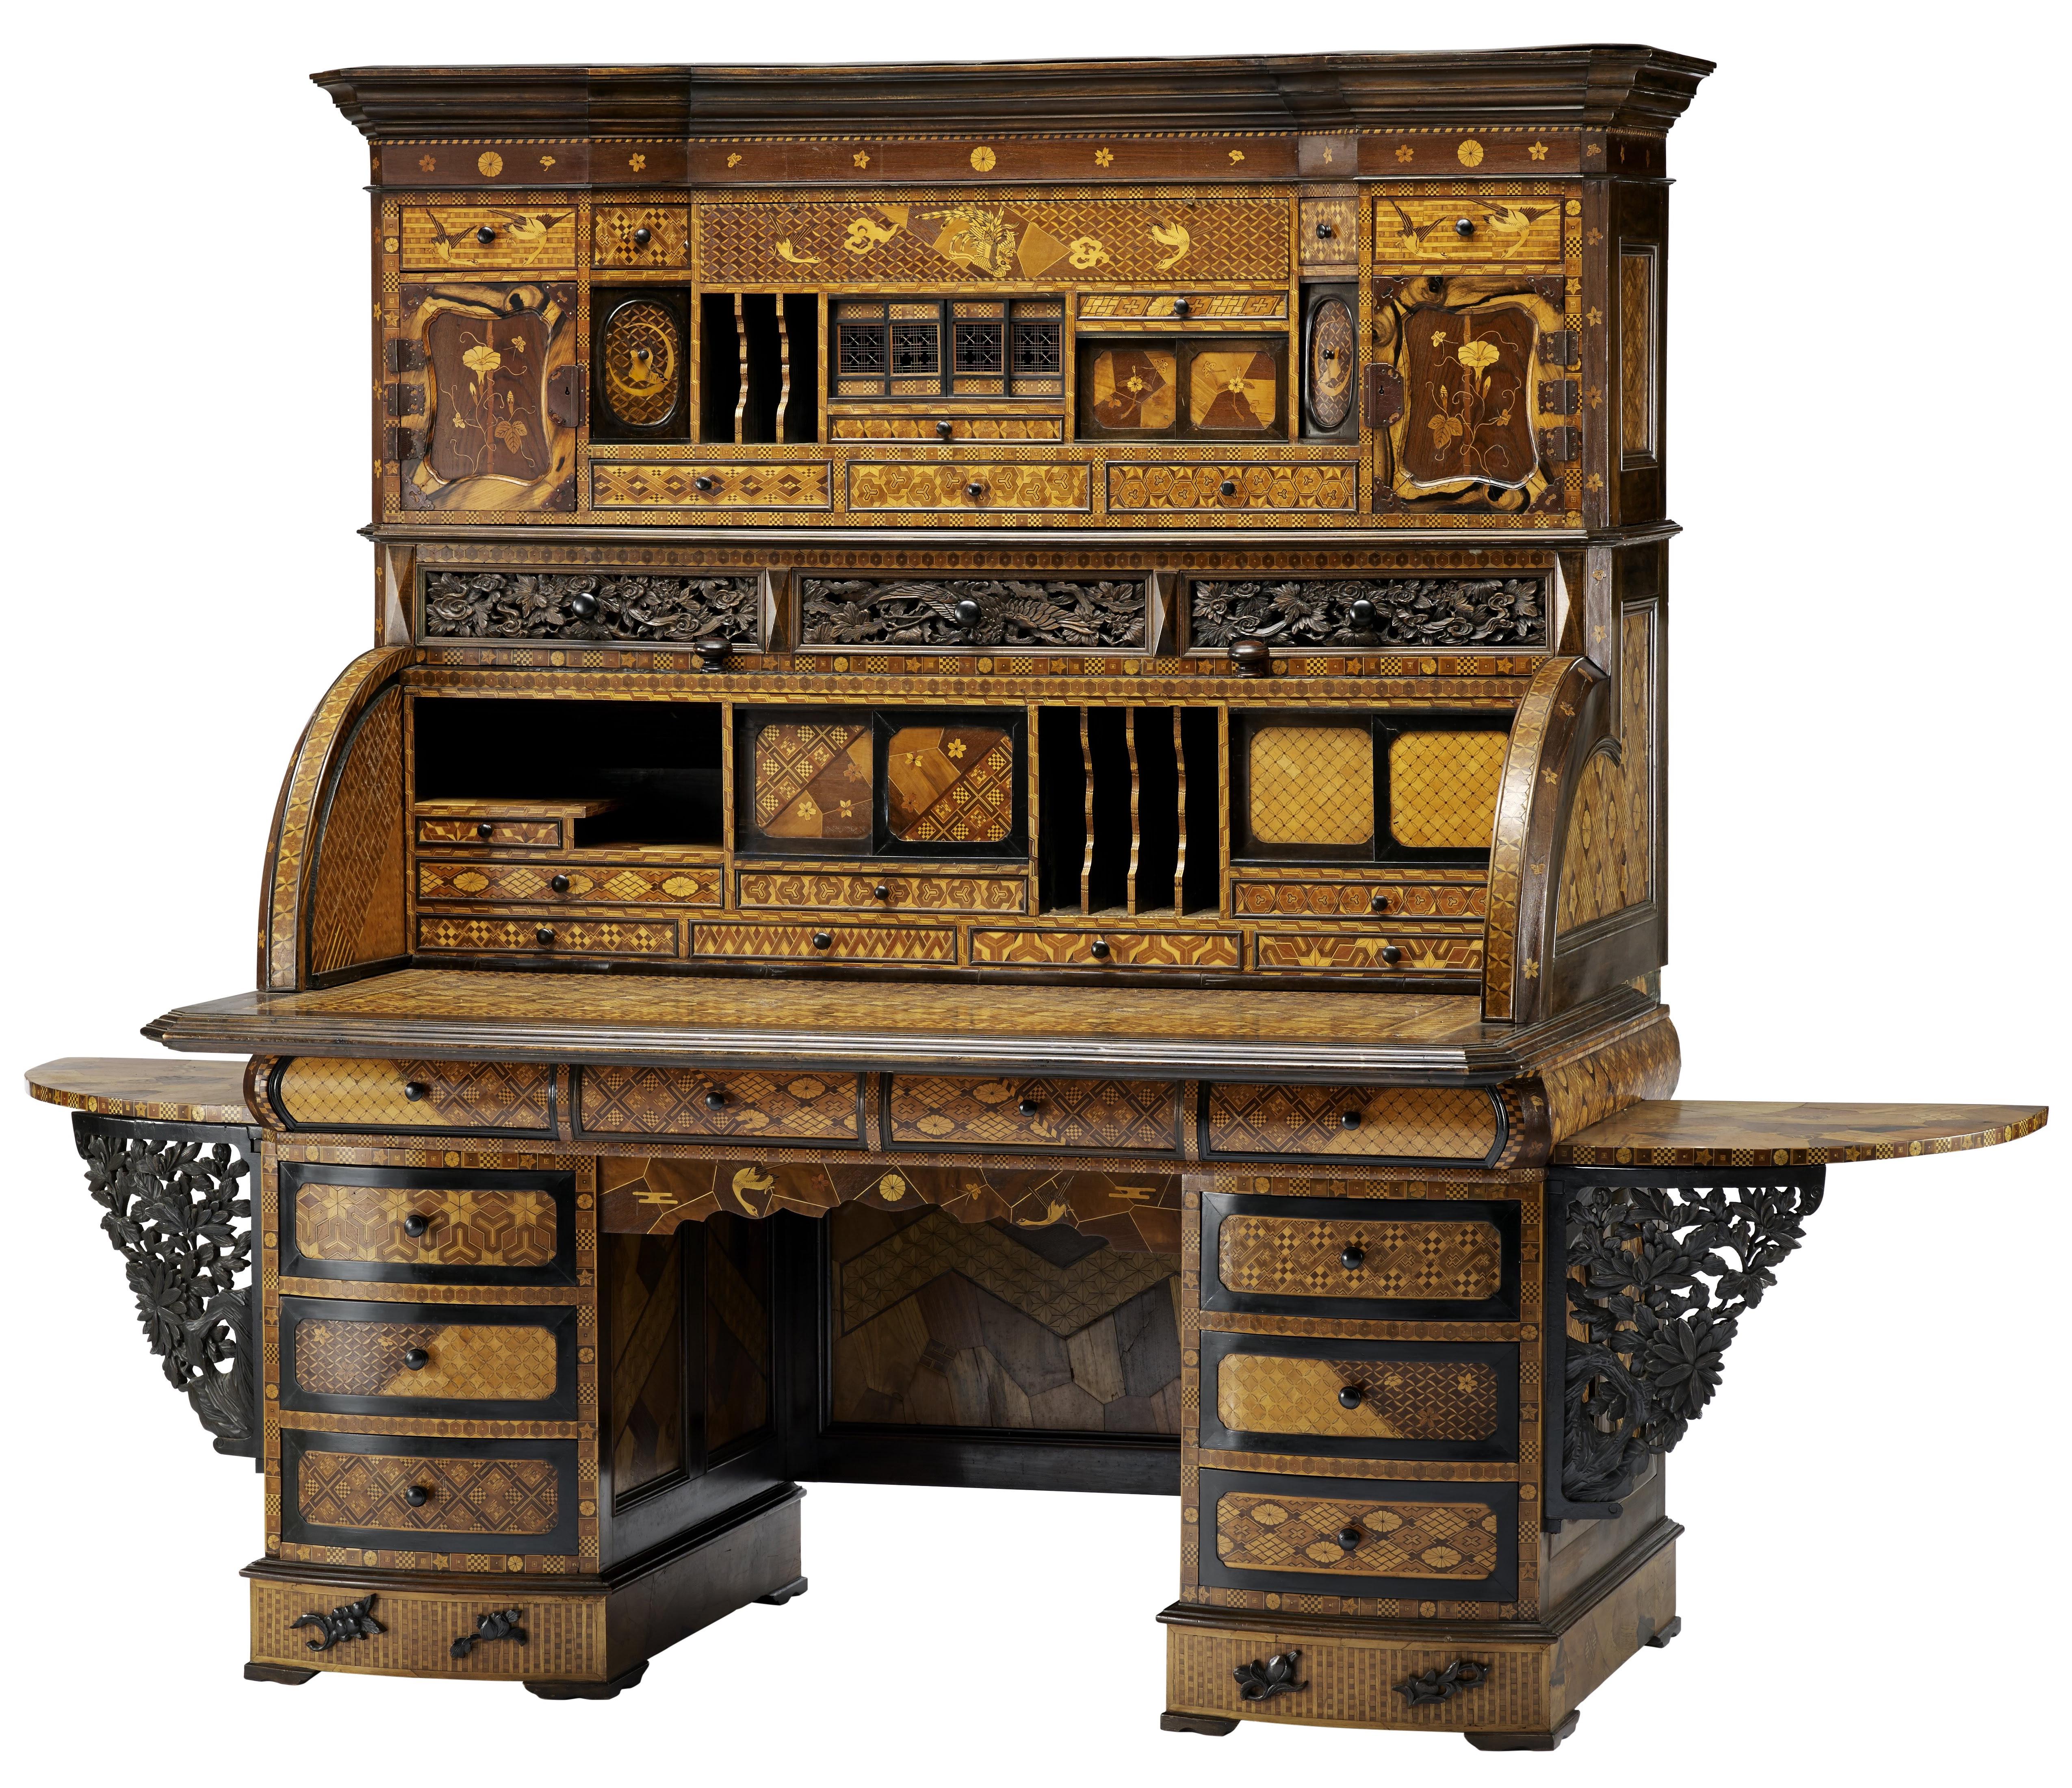 Writing table with marquetry patterns. Japan, Meiji period, 19th century. Exported to London.jpeg